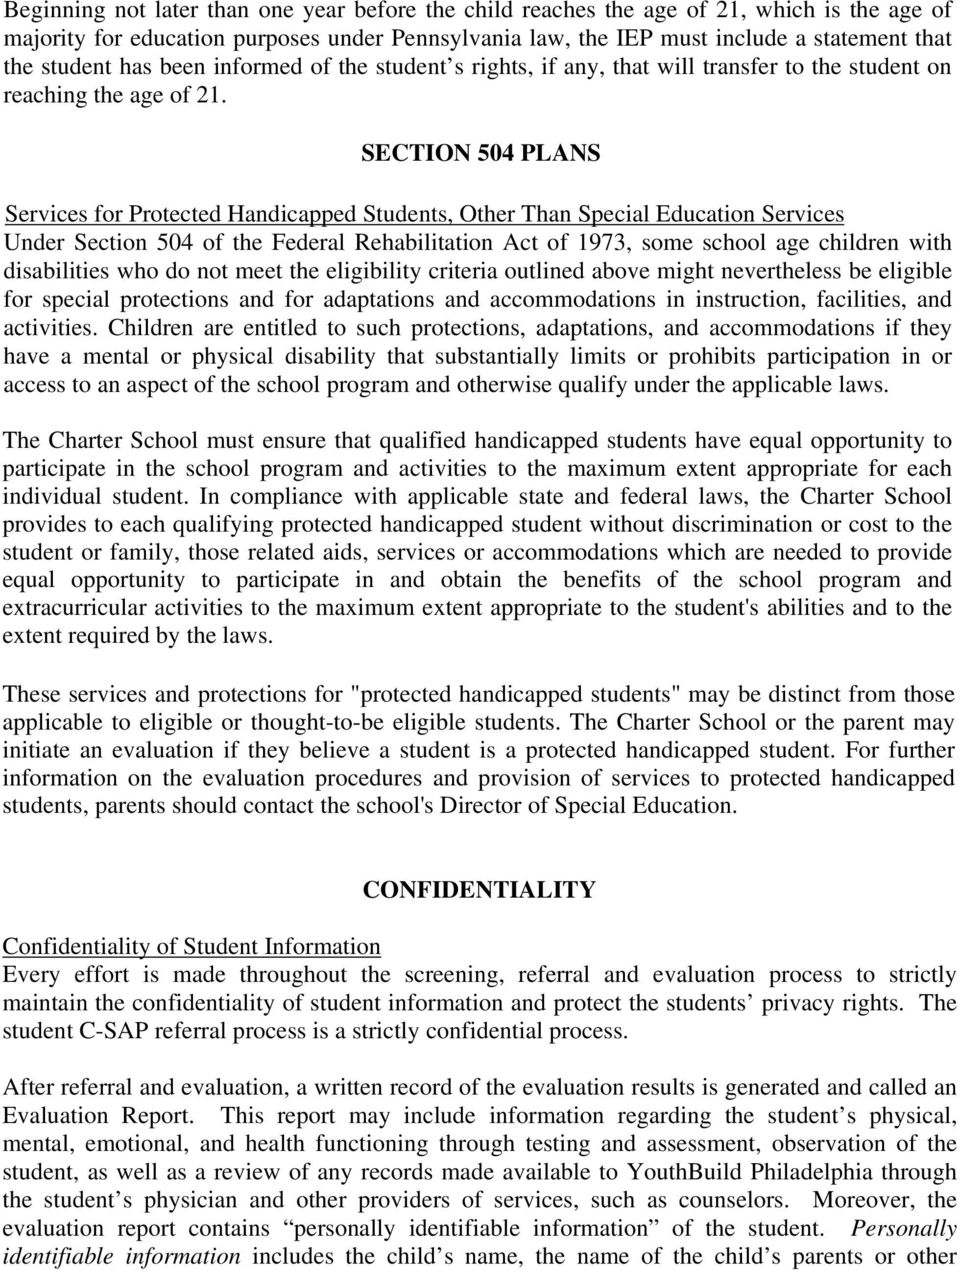 SECTION 504 PLANS Services for Protected Handicapped Students, Other Than Special Education Services Under Section 504 of the Federal Rehabilitation Act of 1973, some school age children with